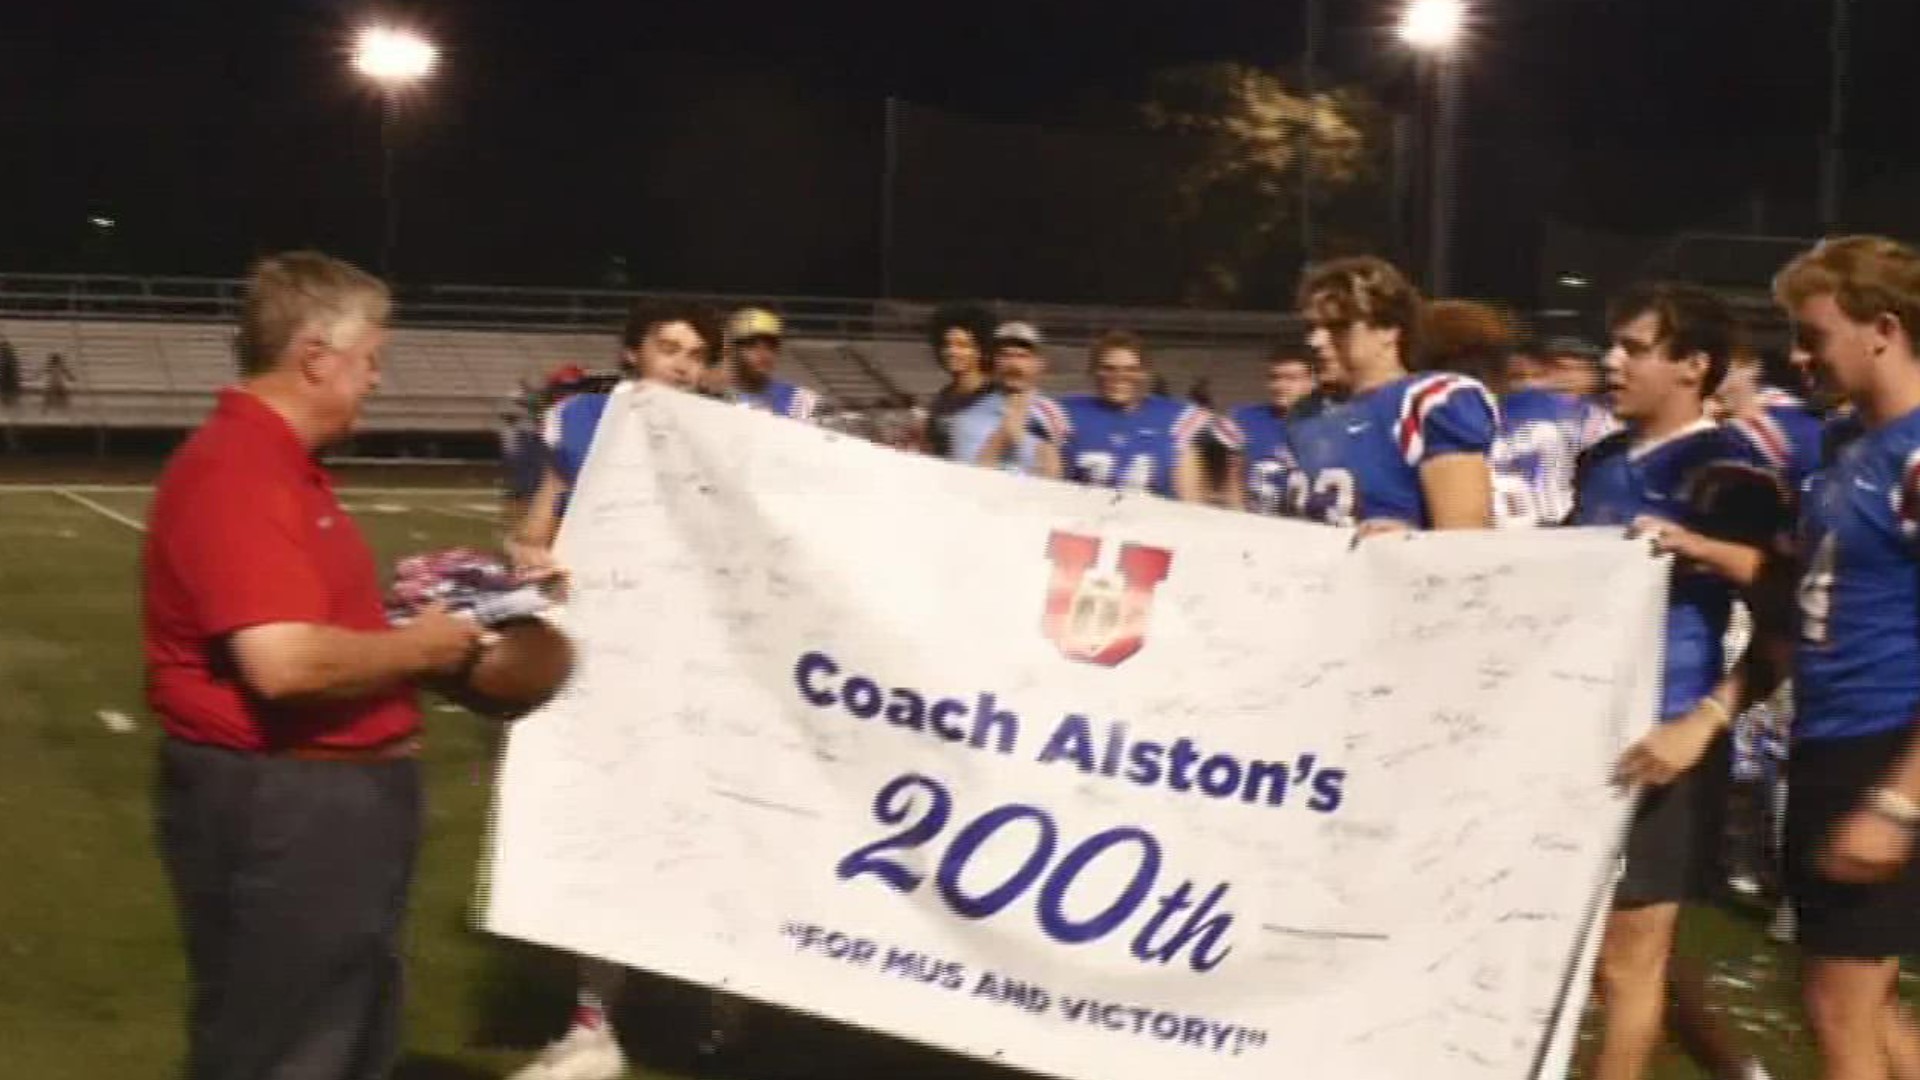 Alston became the seventh coach in Shelby County history to win 200 career football games.